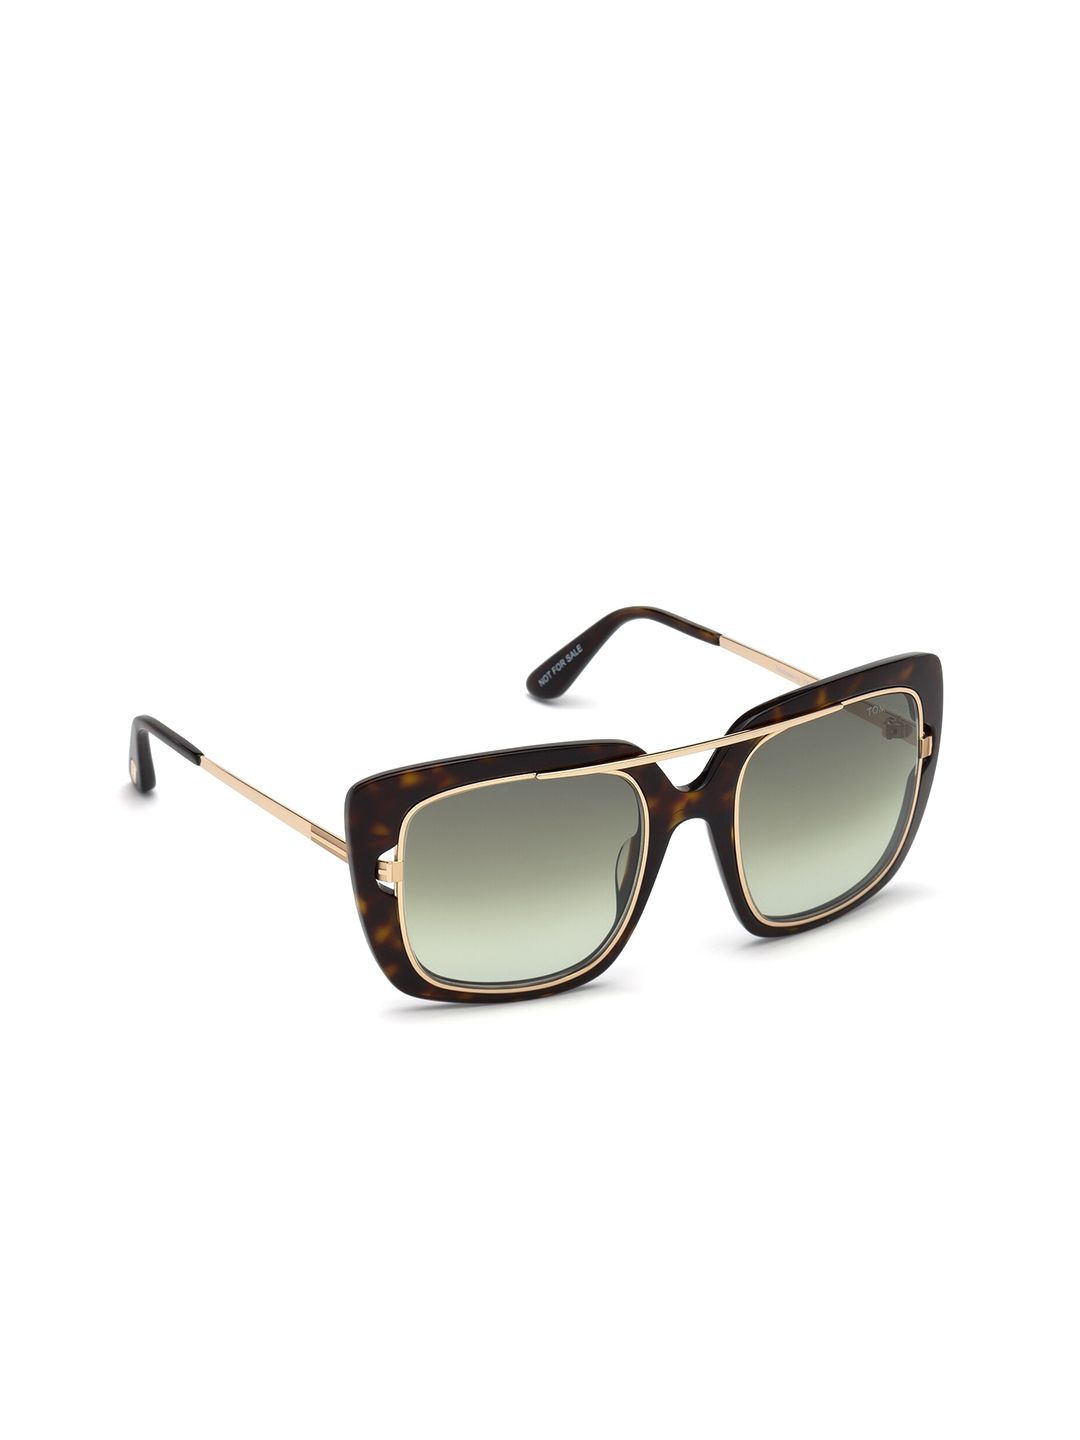 Tom Ford Women Grey Lens & Gold-Toned Square Sunglasses - FT0619 52 52P-Brown Price in India